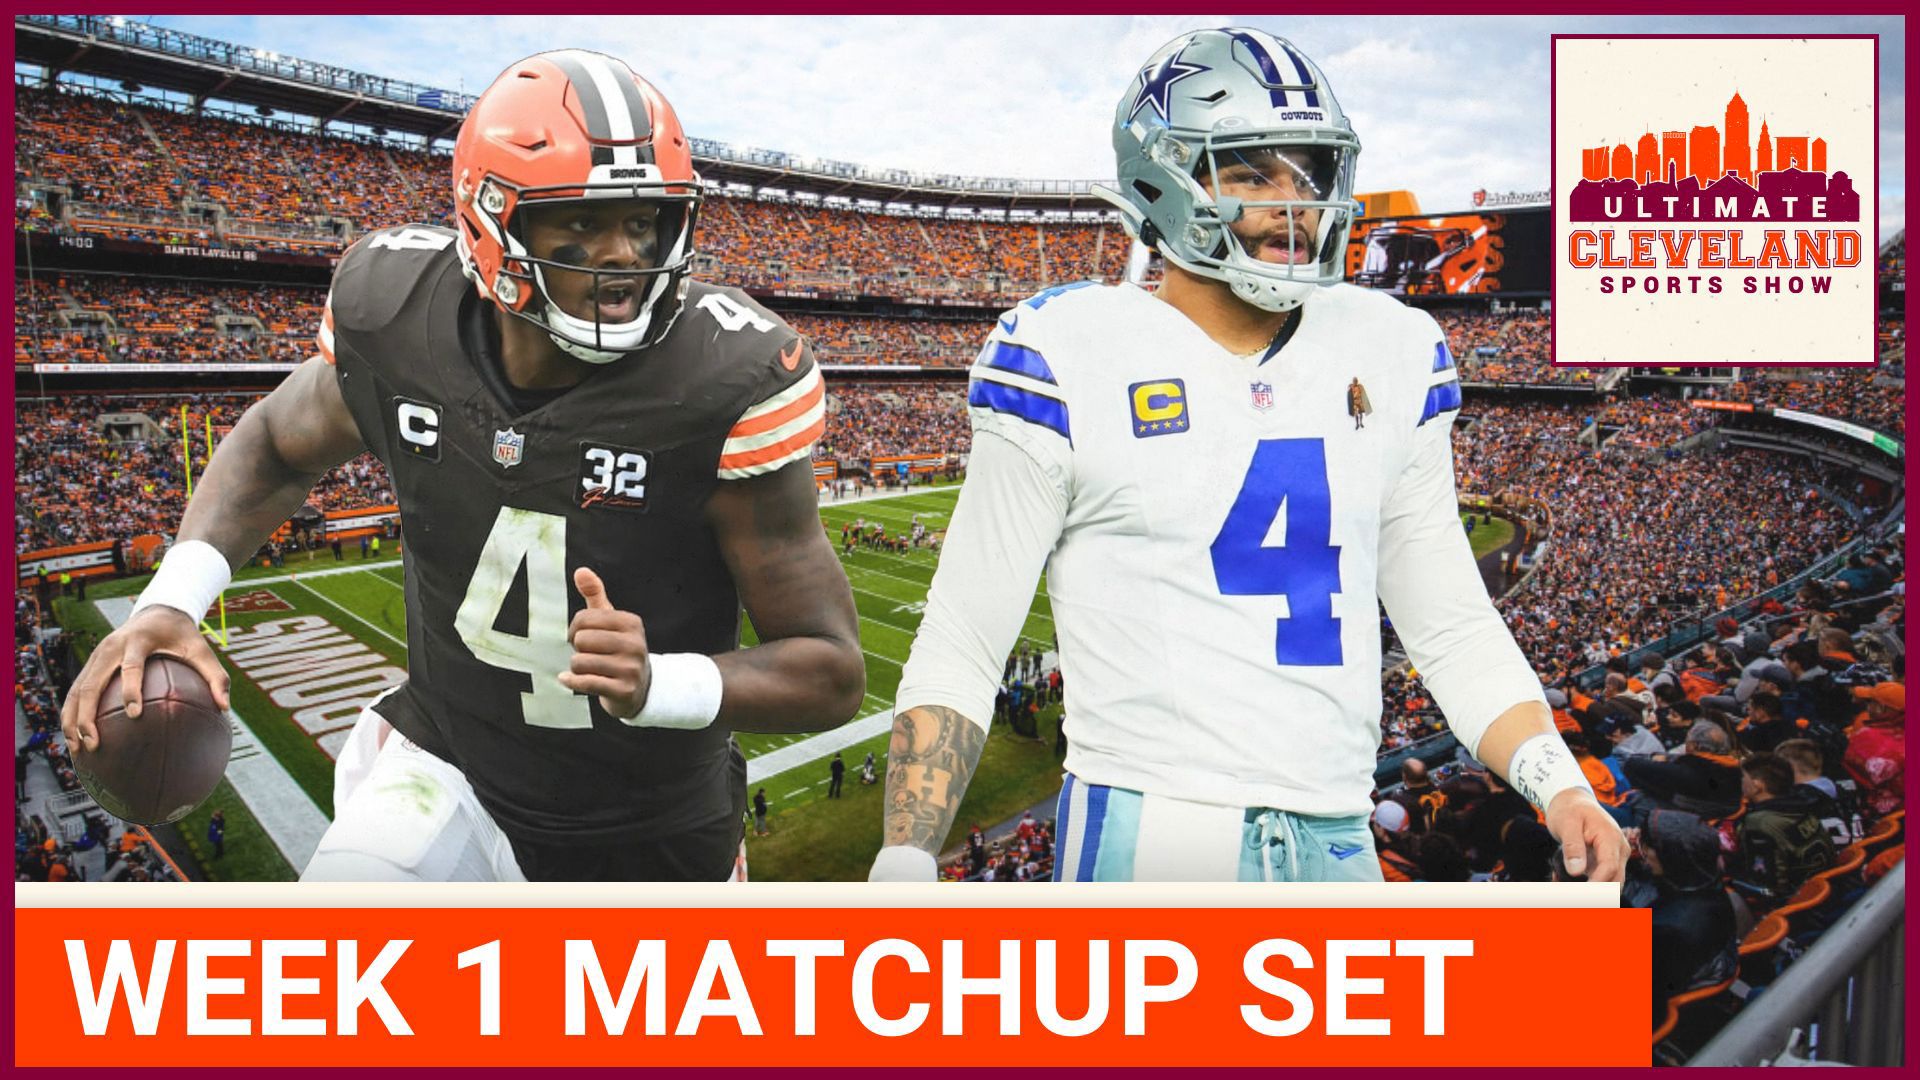 What will be the most significant story line in week 1 when the Cleveland Browns host the Dallas Cowboys